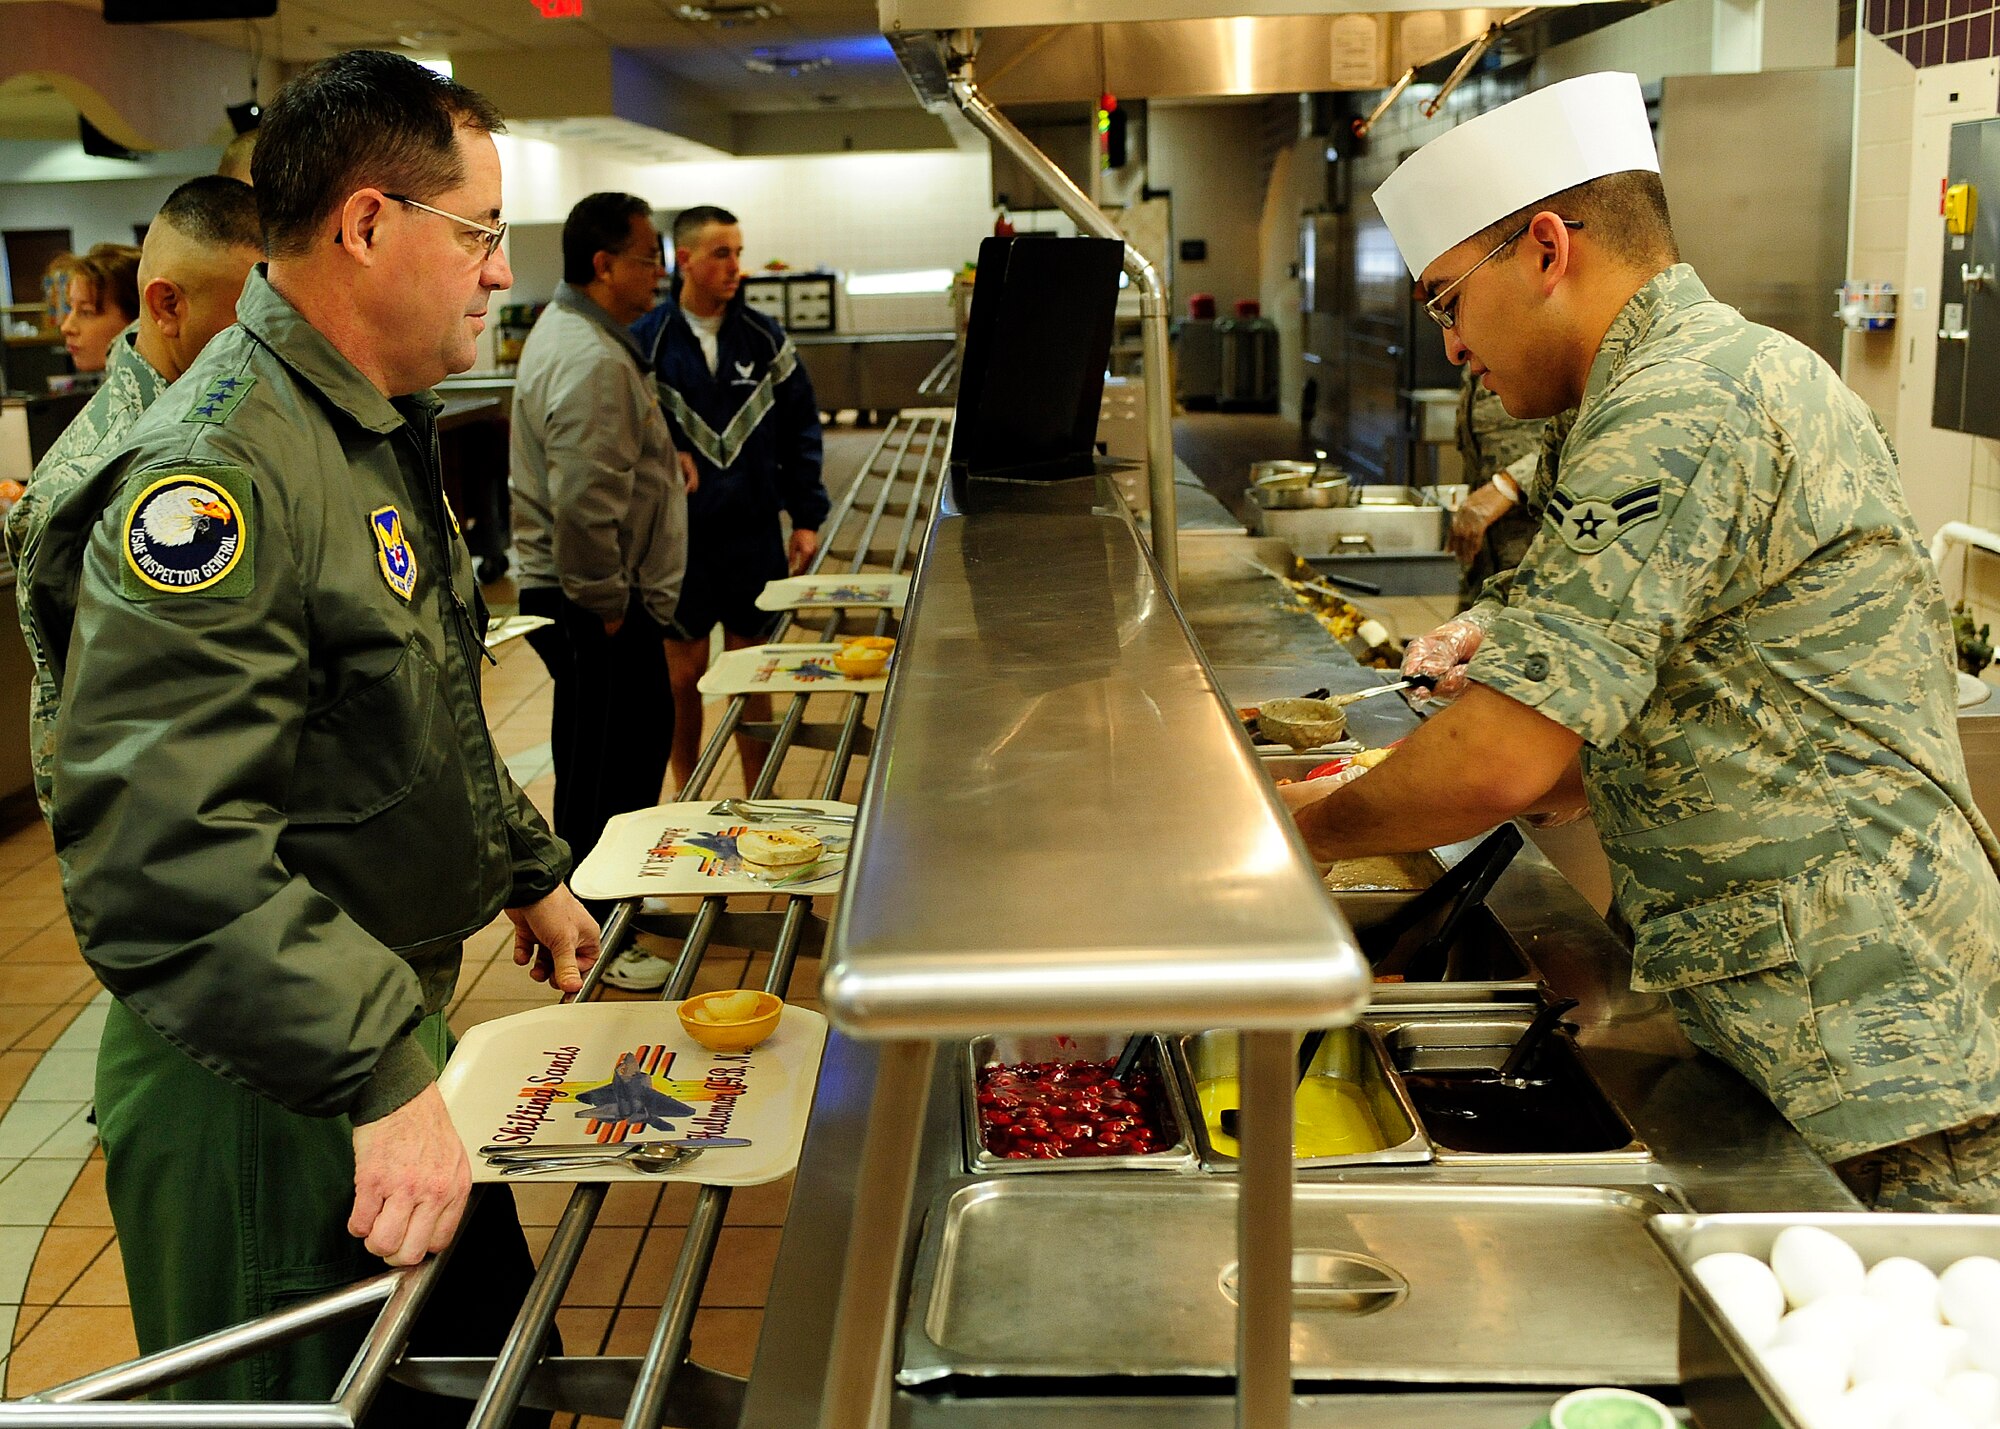 HOLOMAN AIR FORCE BASE, N.M. -- Lt. Gen. Marc Rogers, U.S. Air Force Inspector General, goes through the dining facility main food line with 49th Fighter Wing Command Chief Master Sgt. Gerardo Tapia, March 26, 2010, as a part of his tour of the base. General Rogers, a former 49th Fighter Wing commander, has commanded at the squadron, group, wing and numbered air force levels. He has led deployed combat operations in both Iraq and Bosnia. (U.S. Air Force photo by Senior Airman DeAndre Curtiss)(Released)